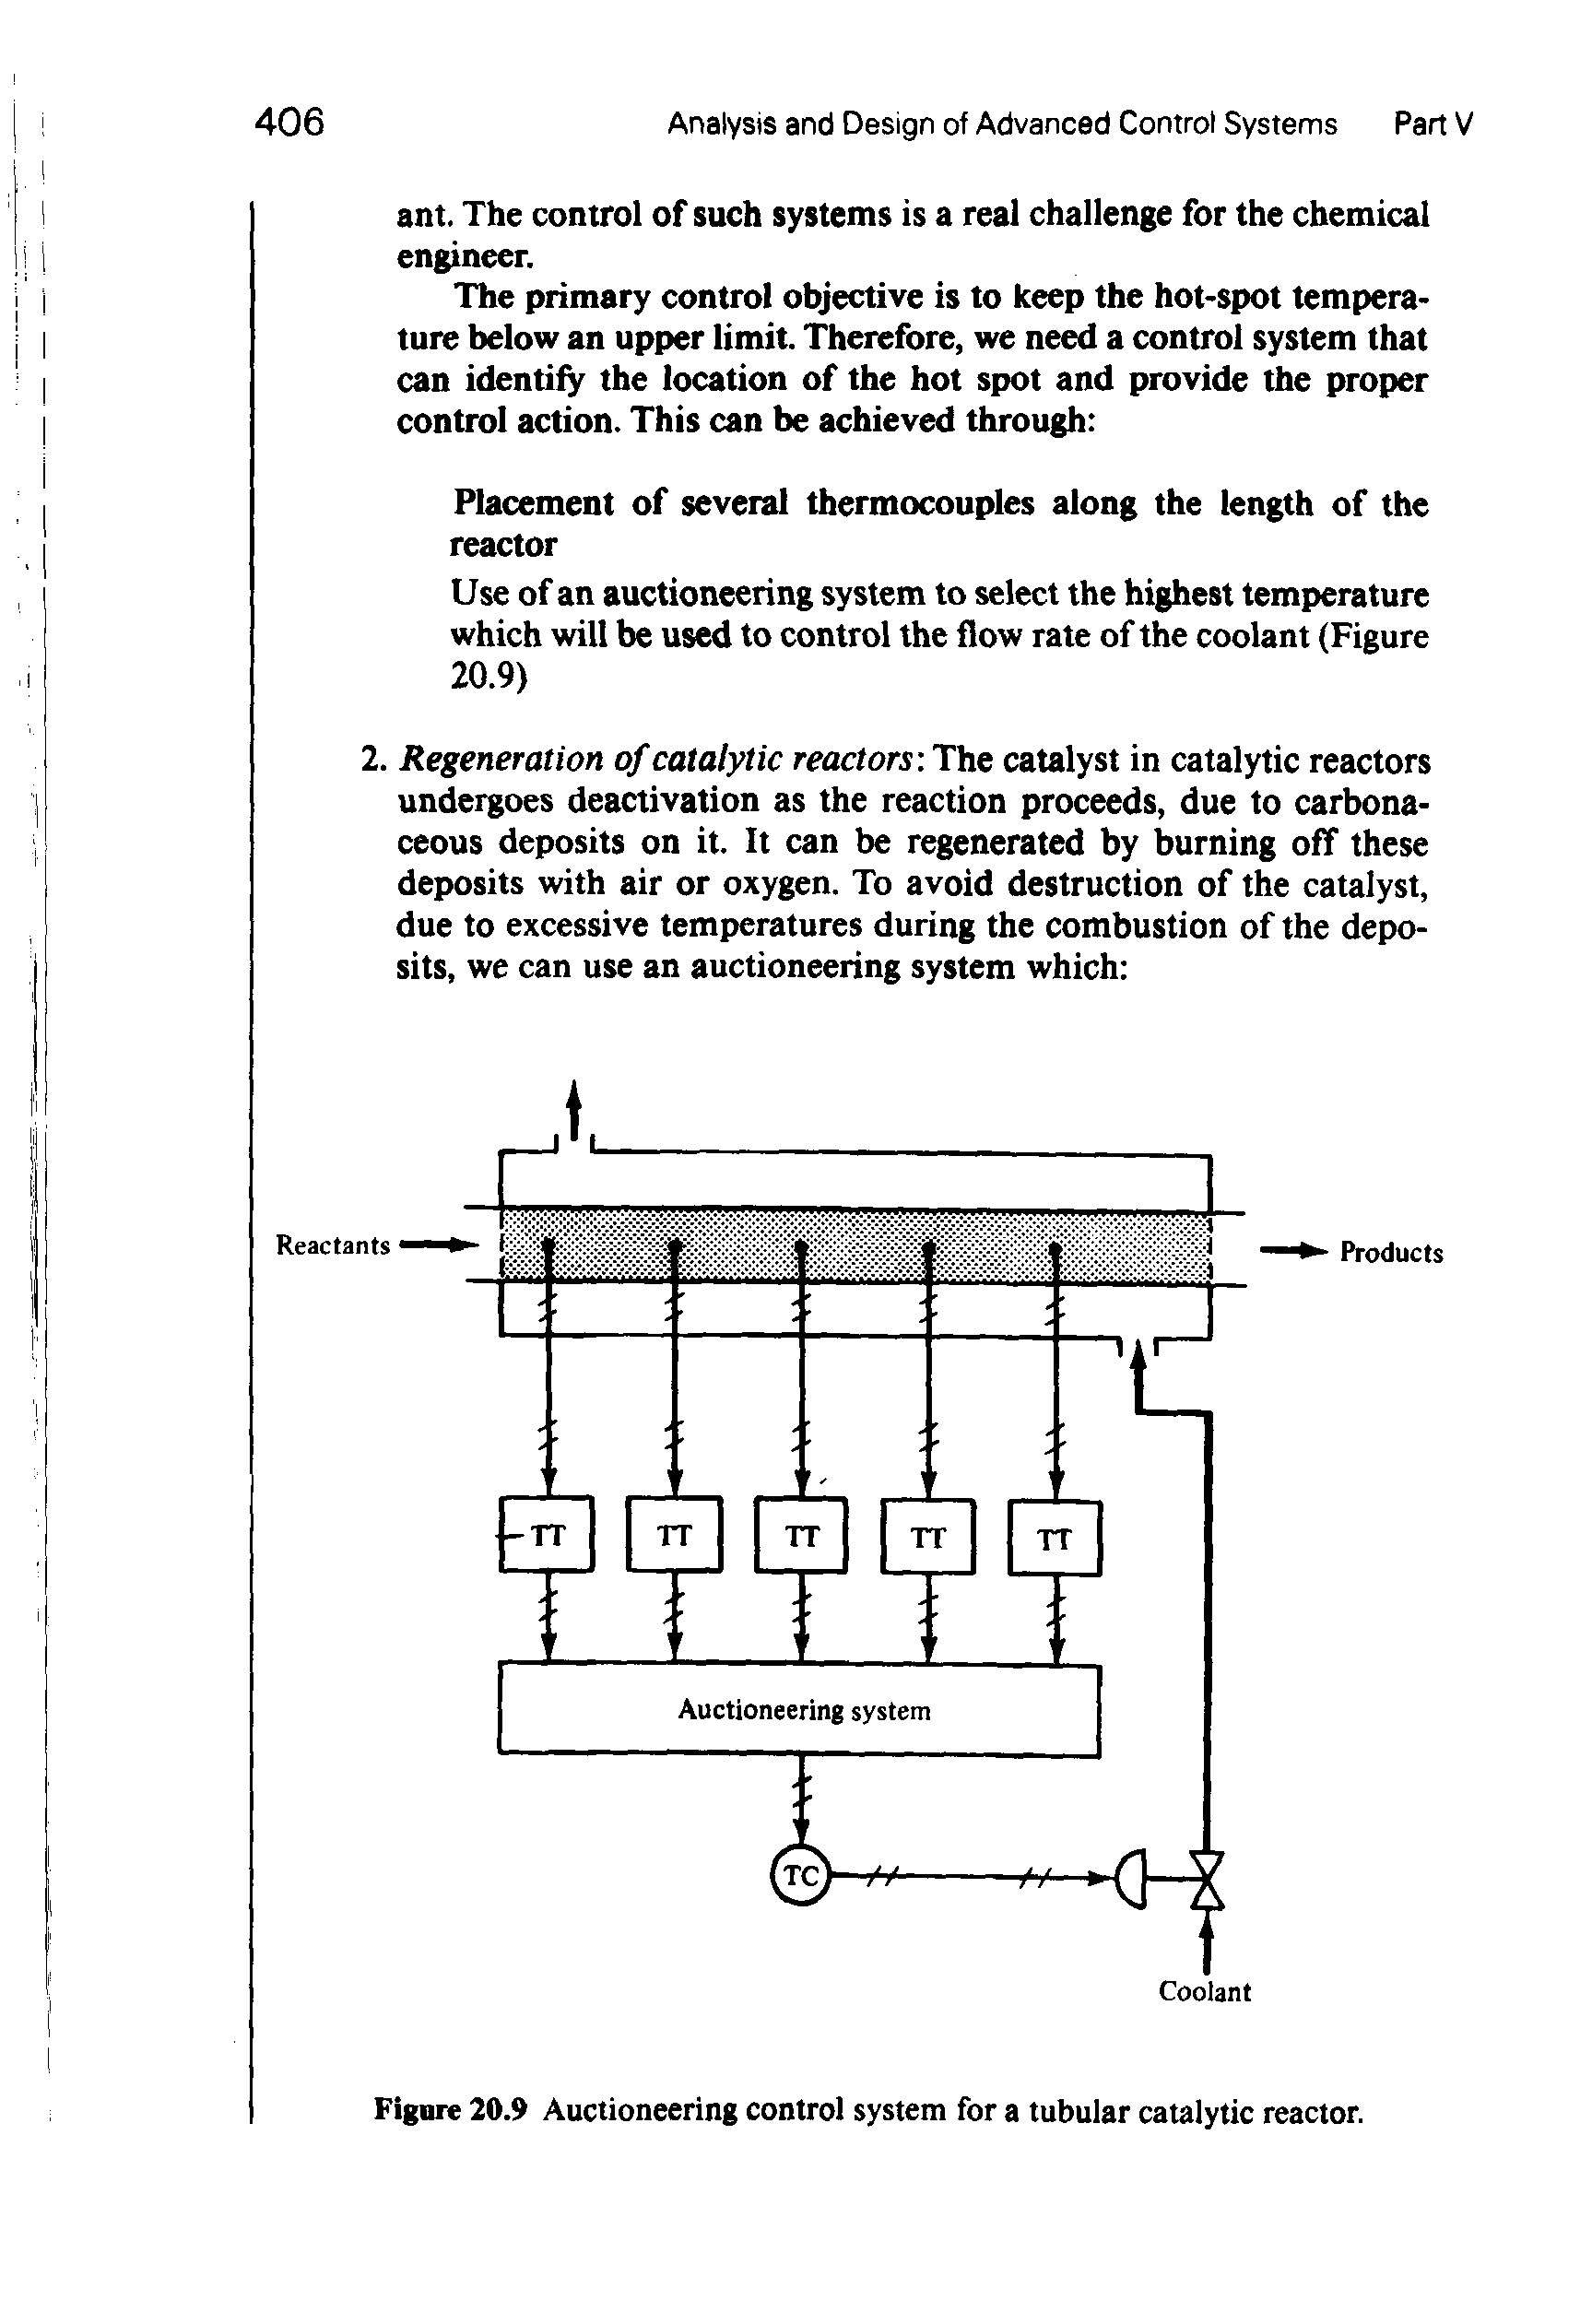 Figure 20.9 Auctioneering control system for a tubular catalytic reactor.